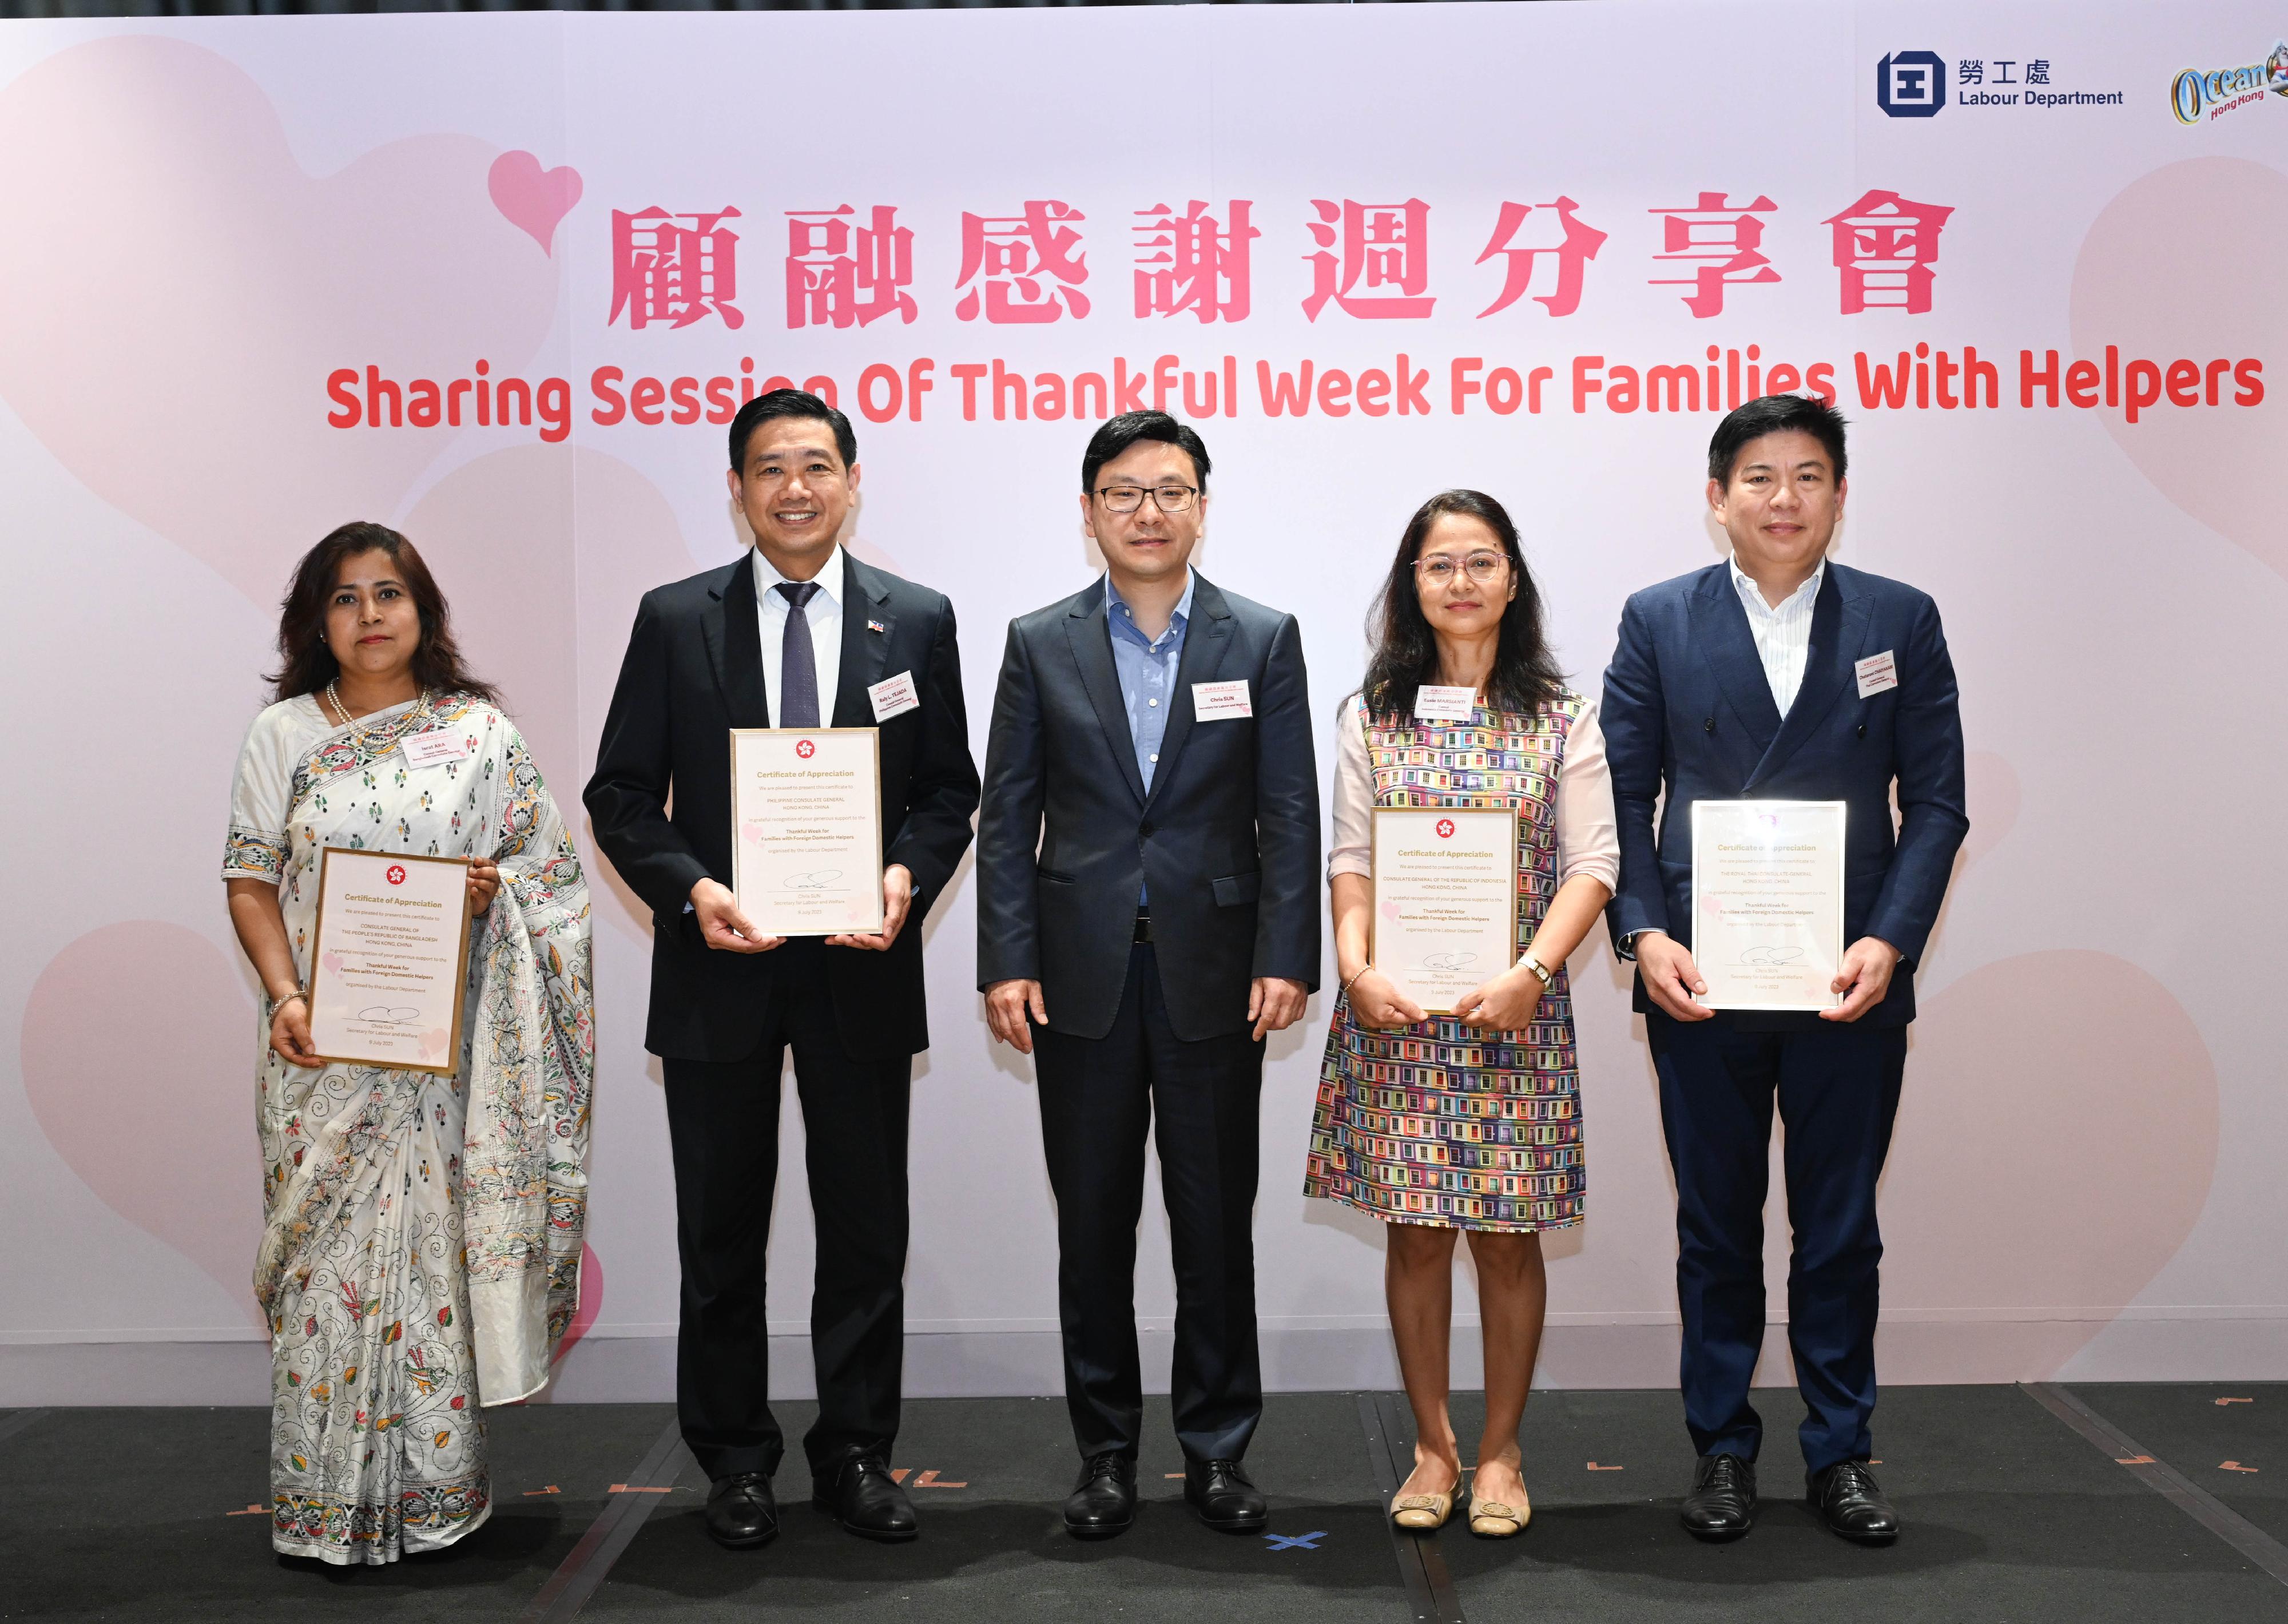 The Labour Department held a sharing session of the Thankful Week for Families with Foreign Domestic Helpers at M+ today (July 9). Photo shows the Secretary for Labour and Welfare, Mr Chris Sun (centre), presenting certificates of appreciation to representatives of Consulates-General of the Philippines, Indonesia, Bangladesh and Thailand in Hong Kong.